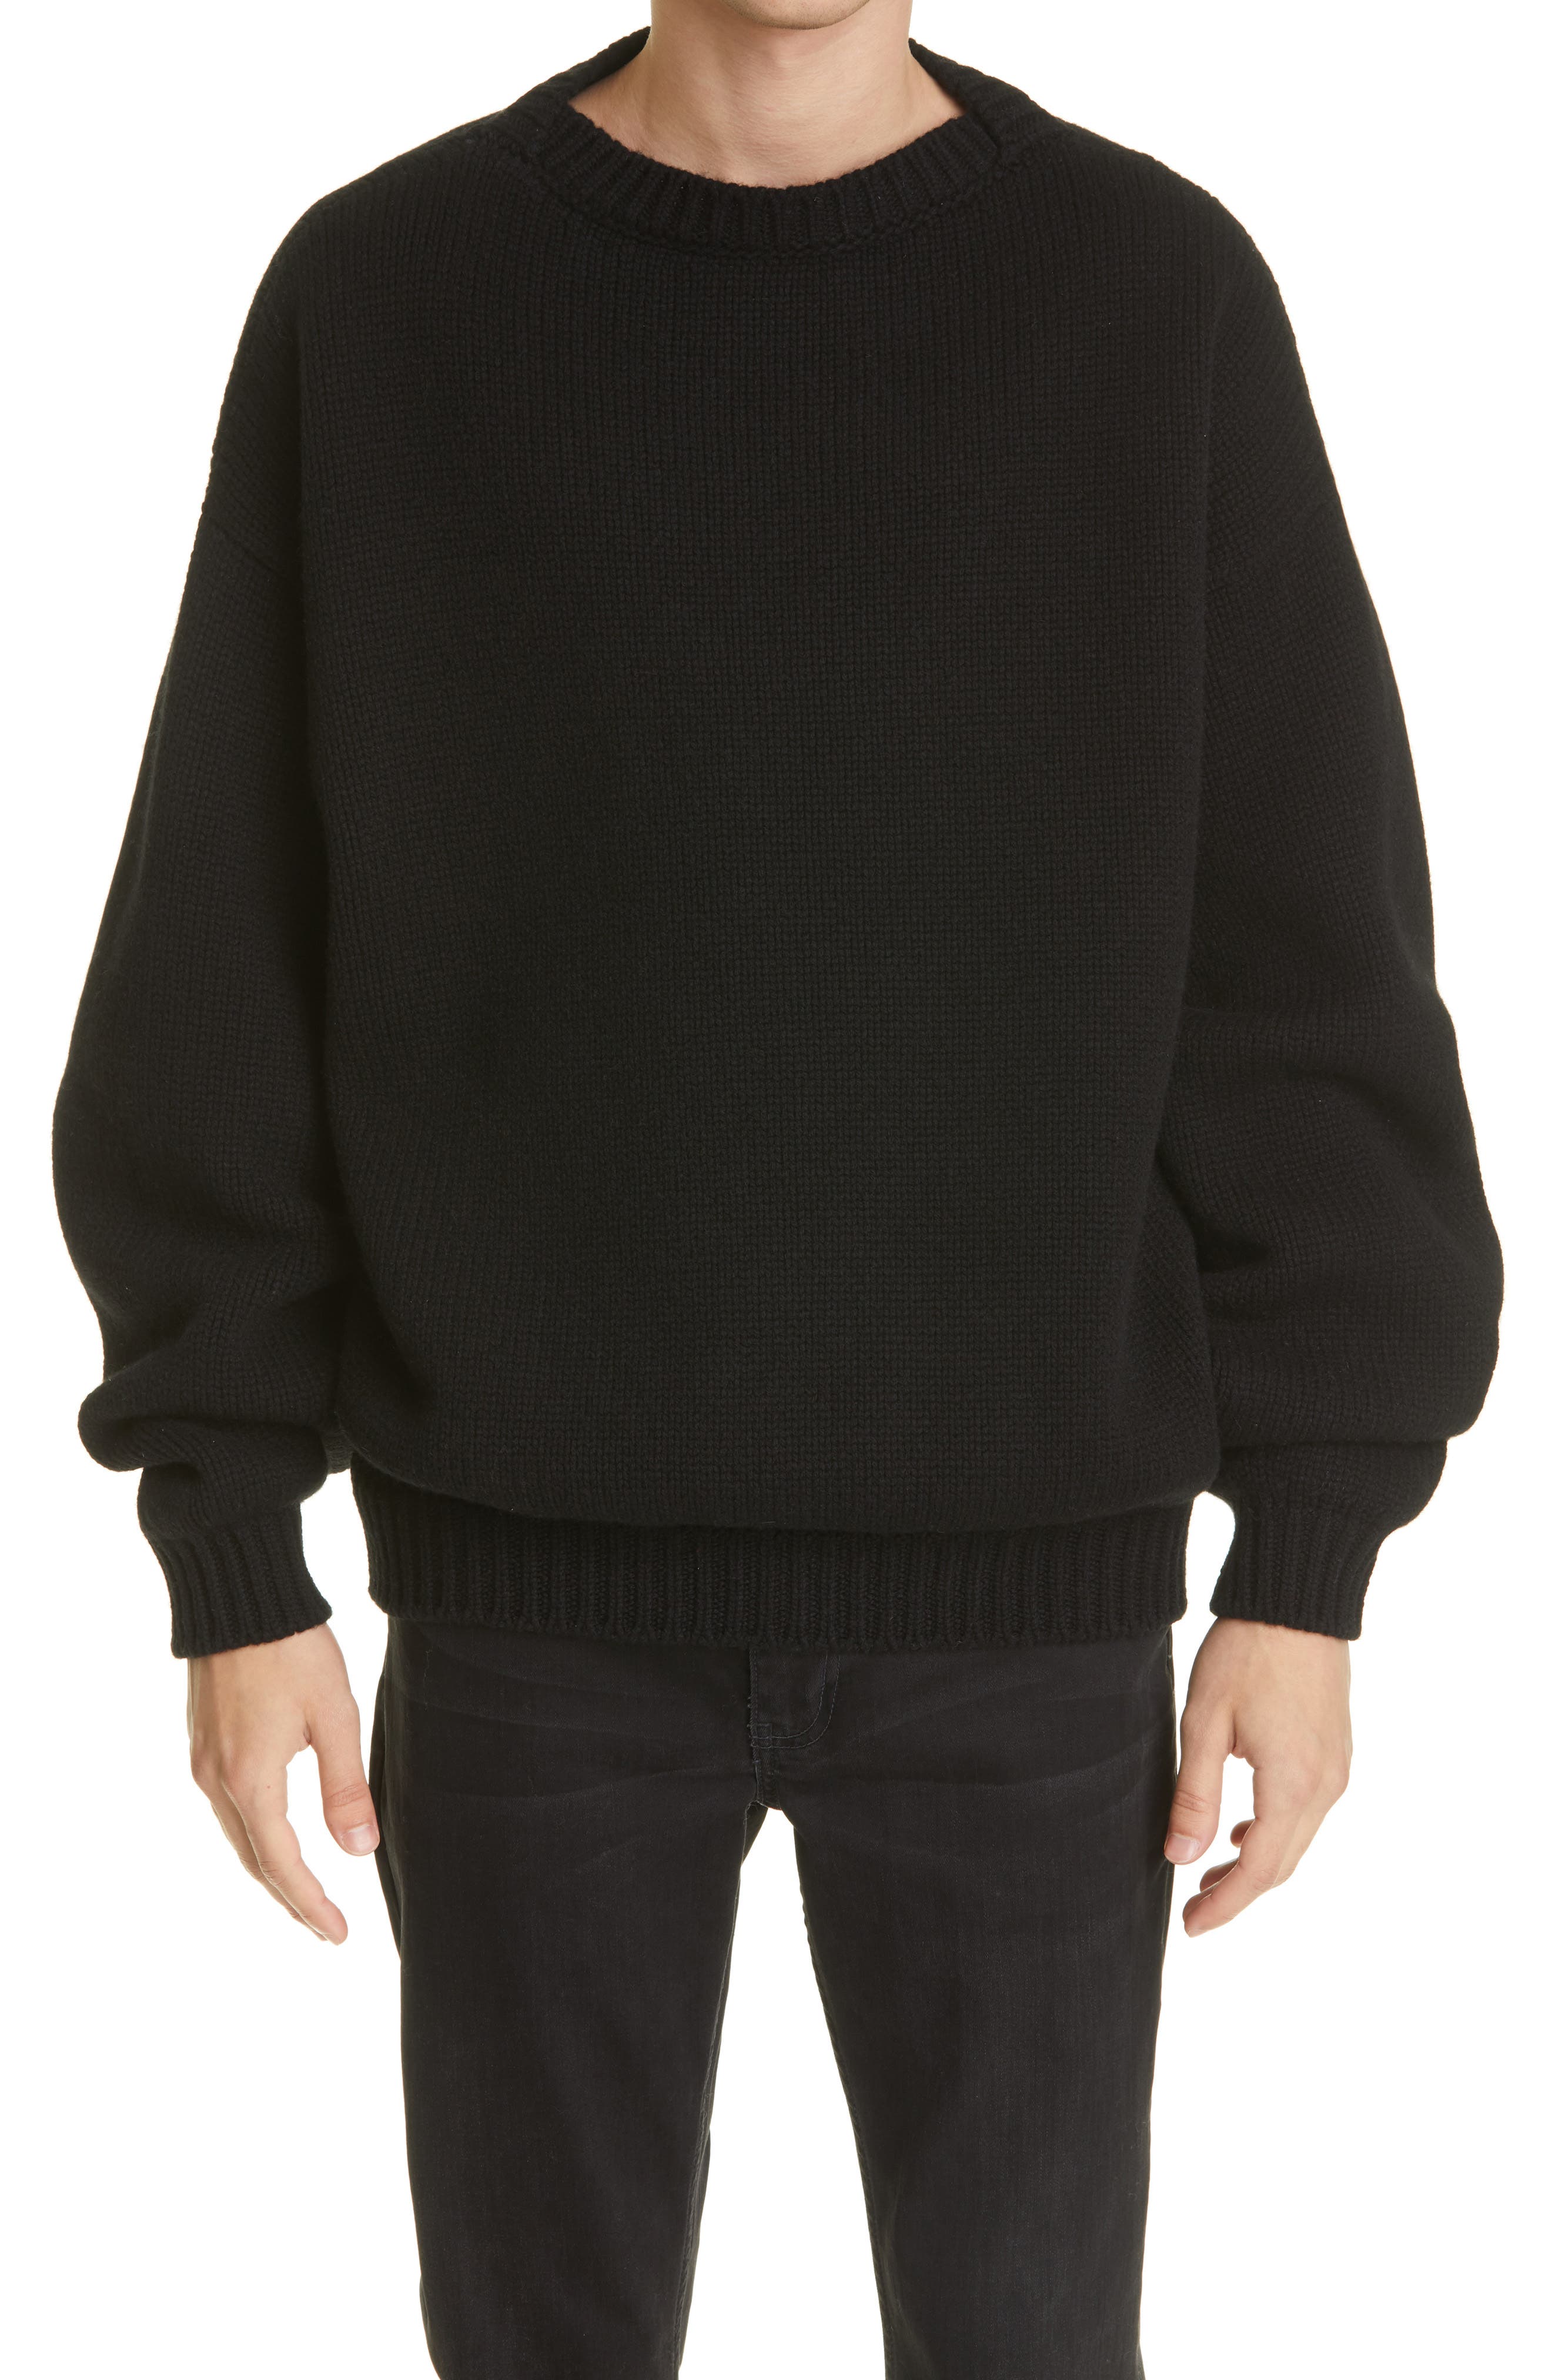 Fear of God Overlapped Wool Sweater in Black at Nordstrom, Size Medium Us